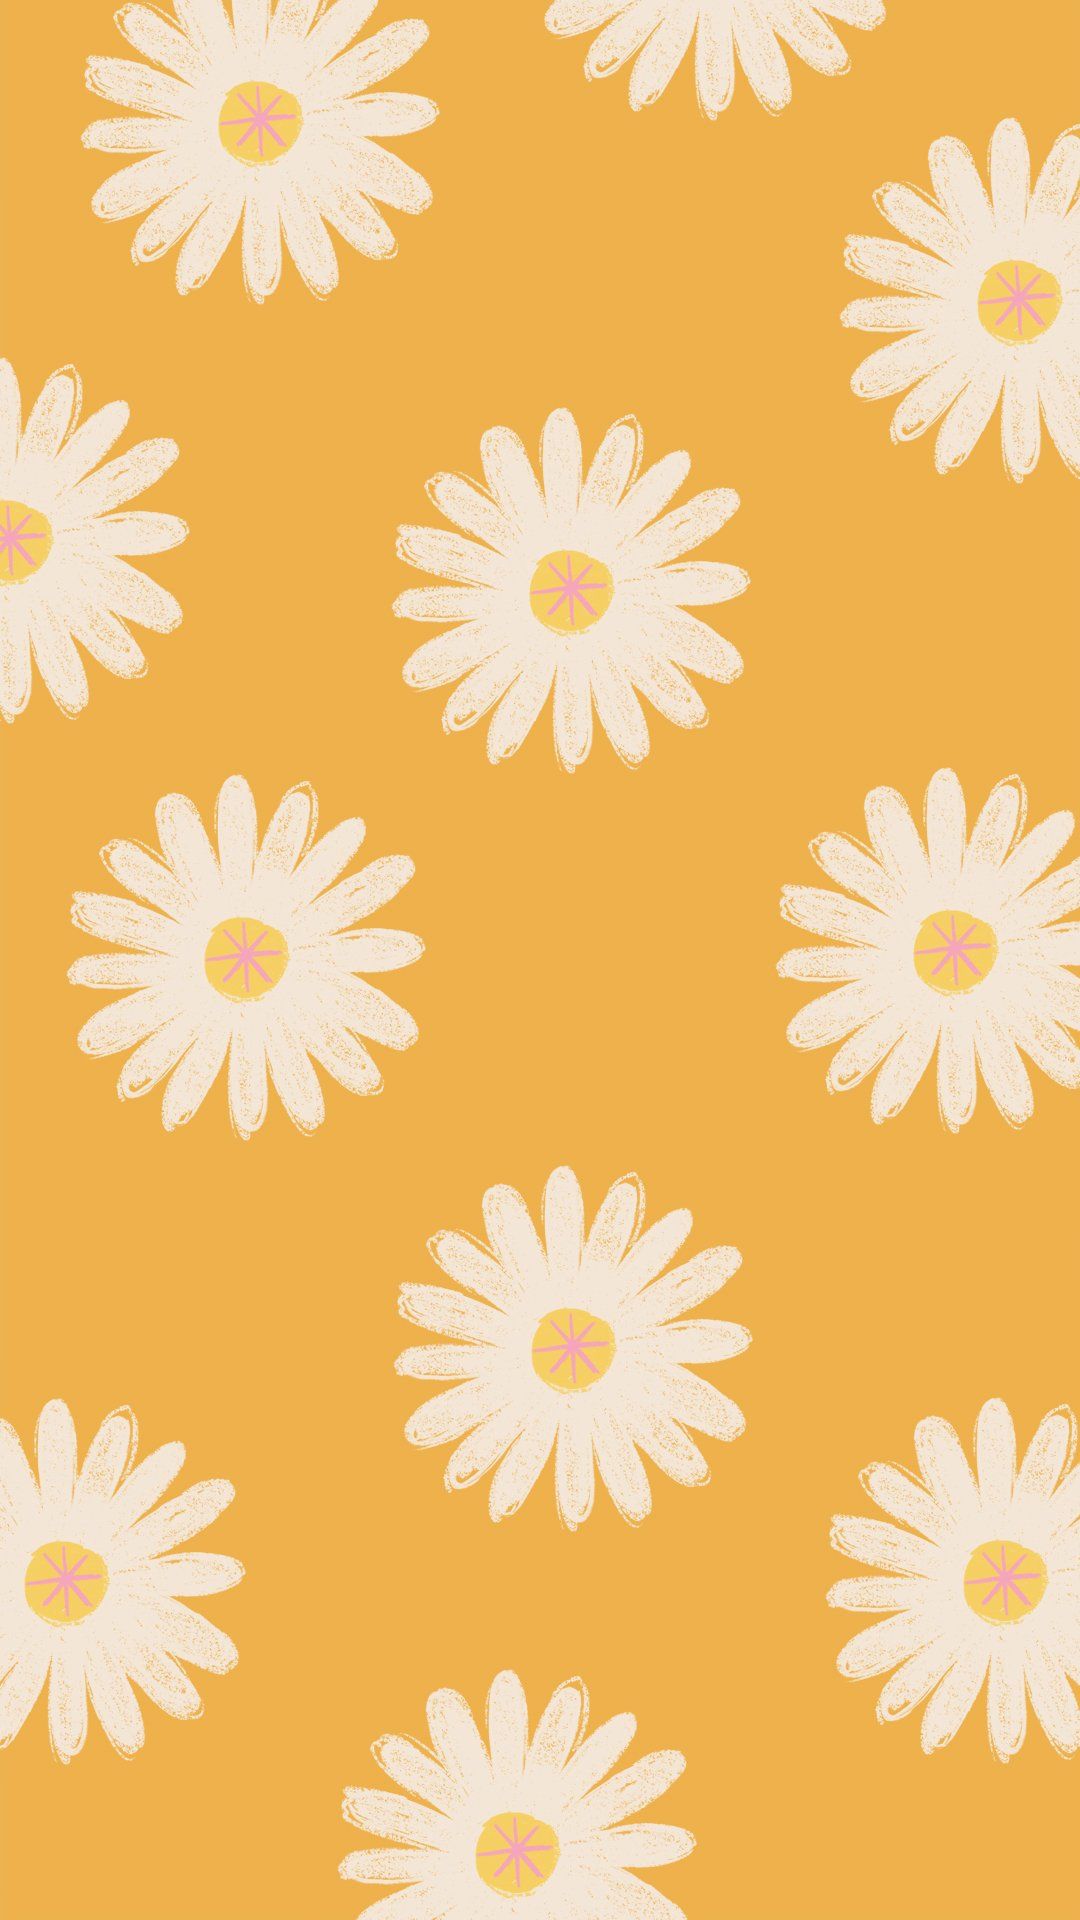 Daisy Spring Wallpapers - Wallpaper Cave